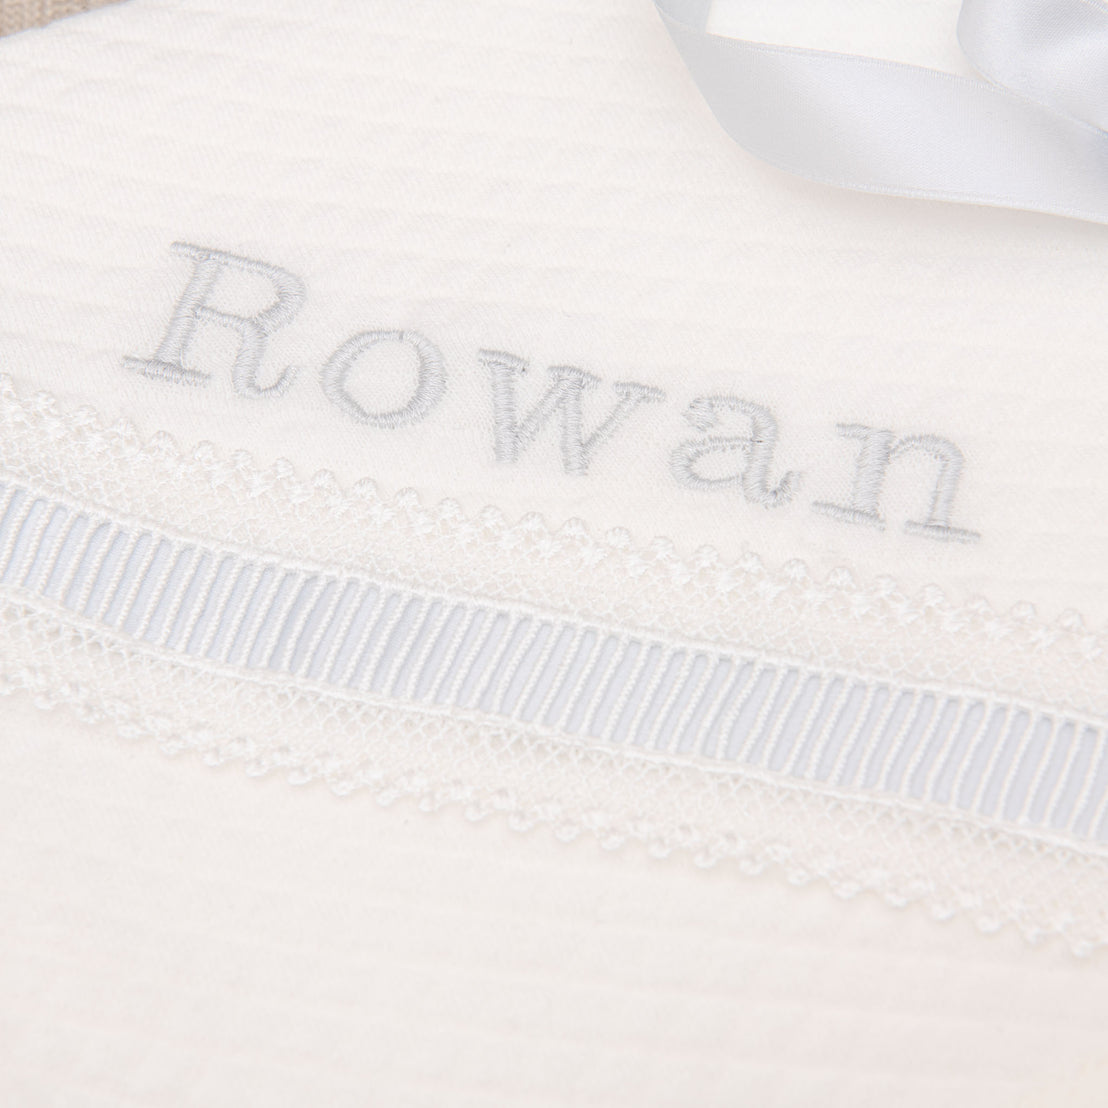 Close up detail of silk embroidery and name 'Ronan' personalized on baptism blanket.